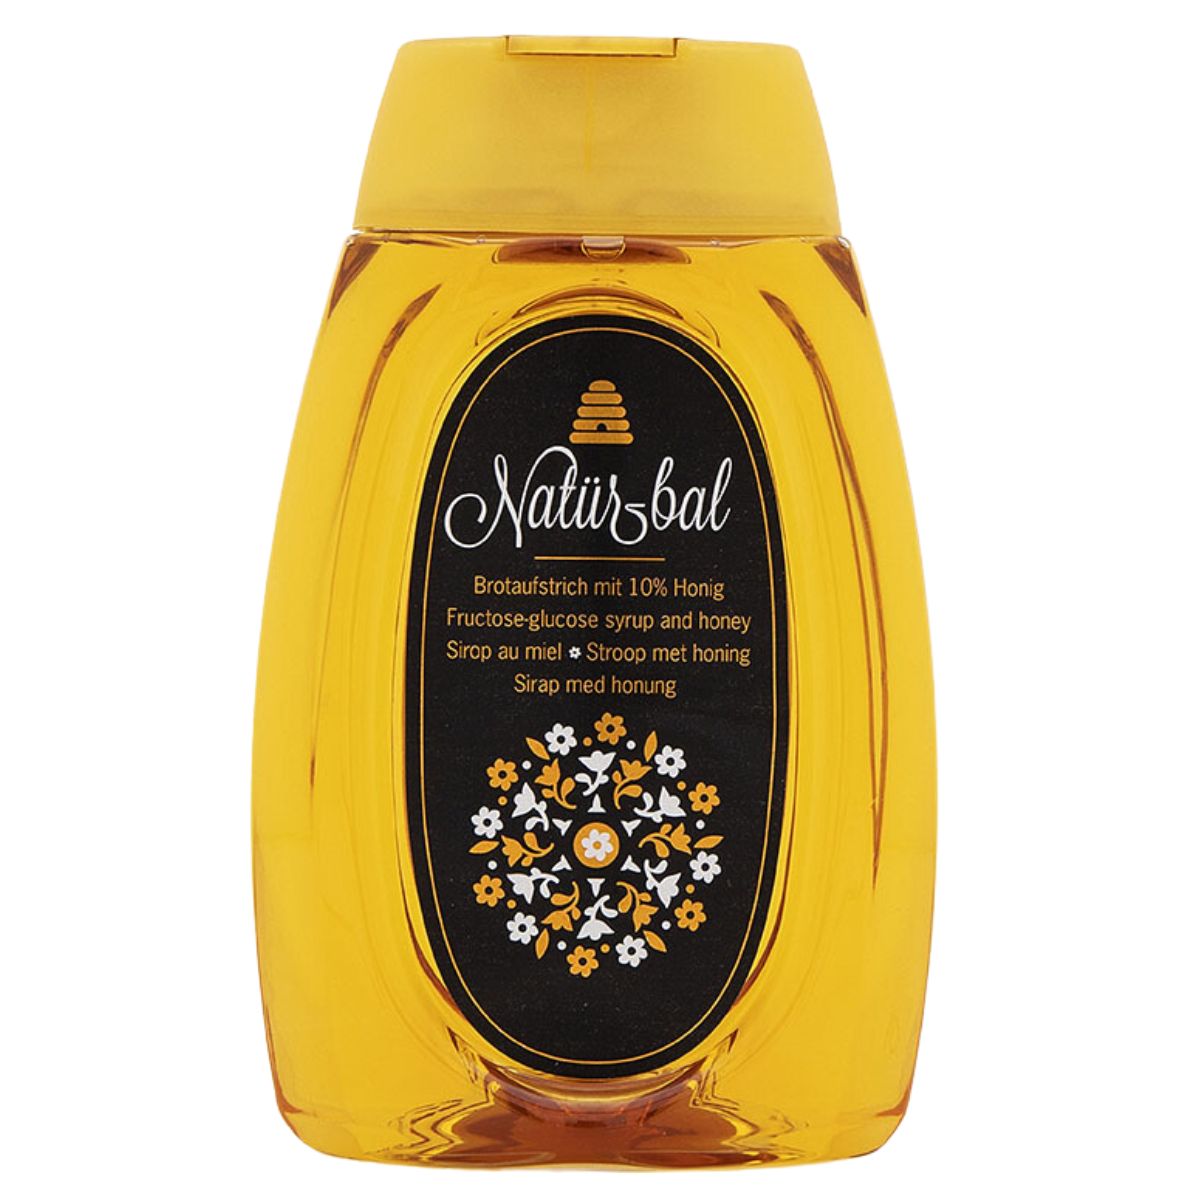 A bottle of Naturbal - Squeezable Syrup With Honey - 300g.